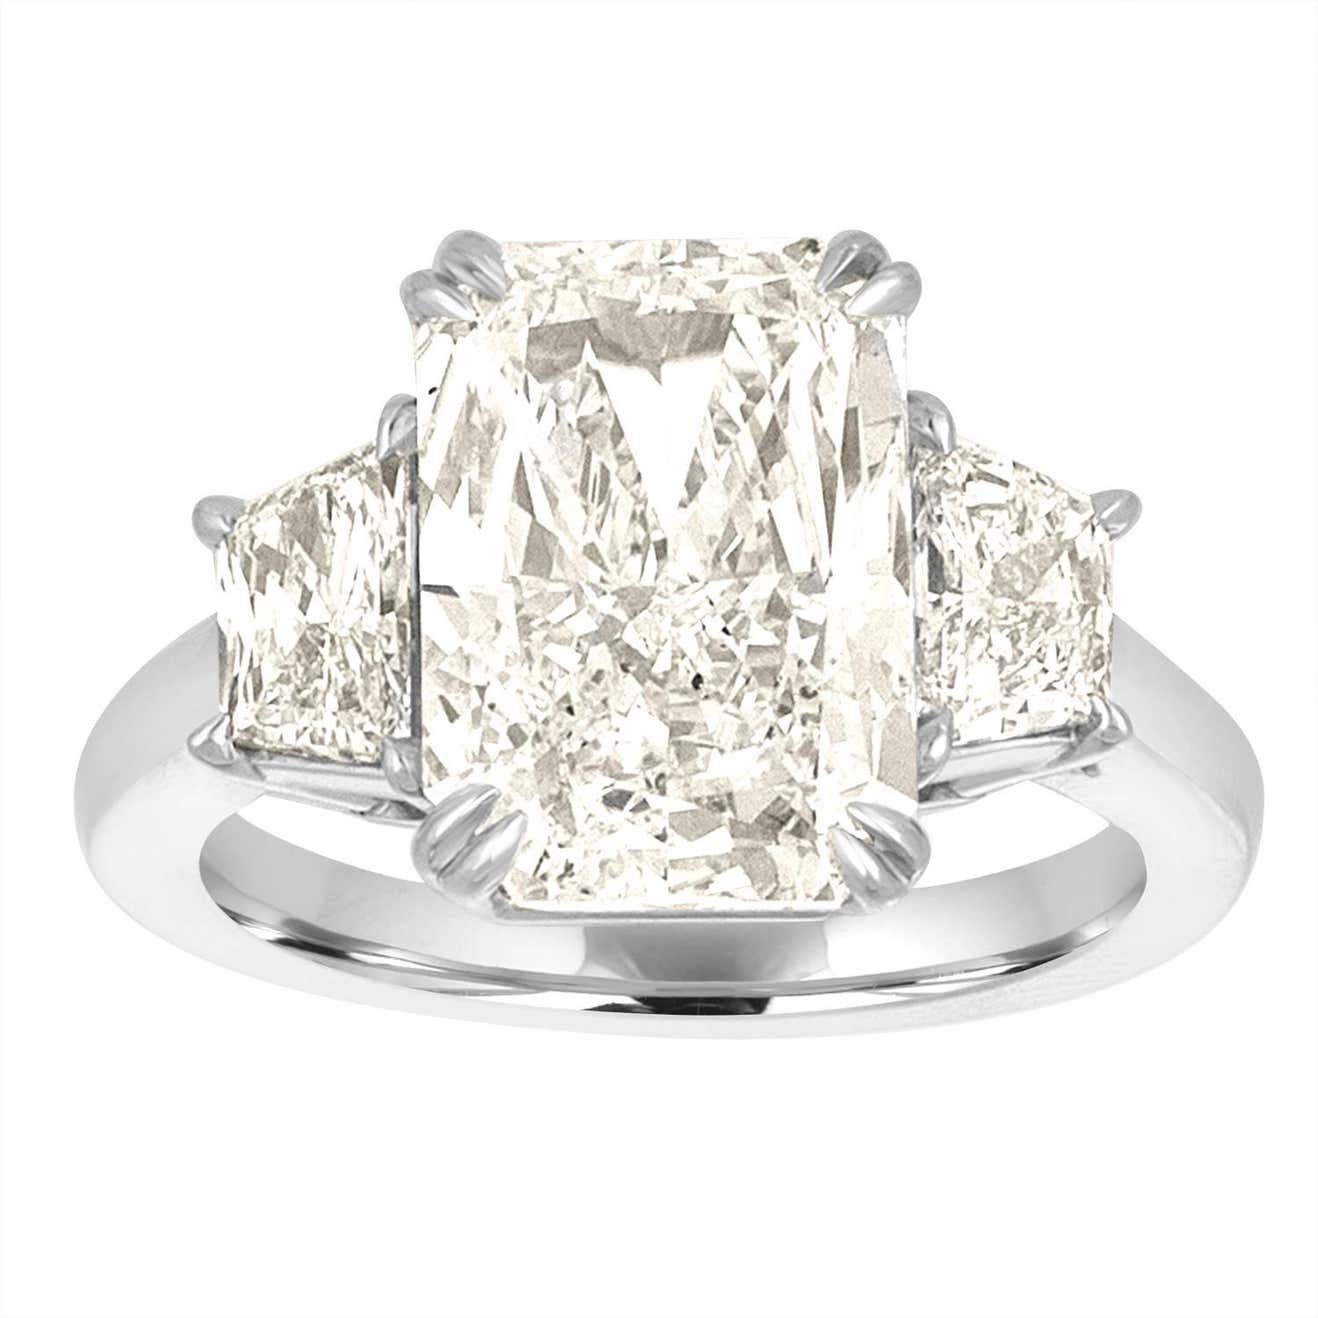 5.12 Carat GIA Cert Radiant Cut Diamond with Two Trapezoids in Platinum ...